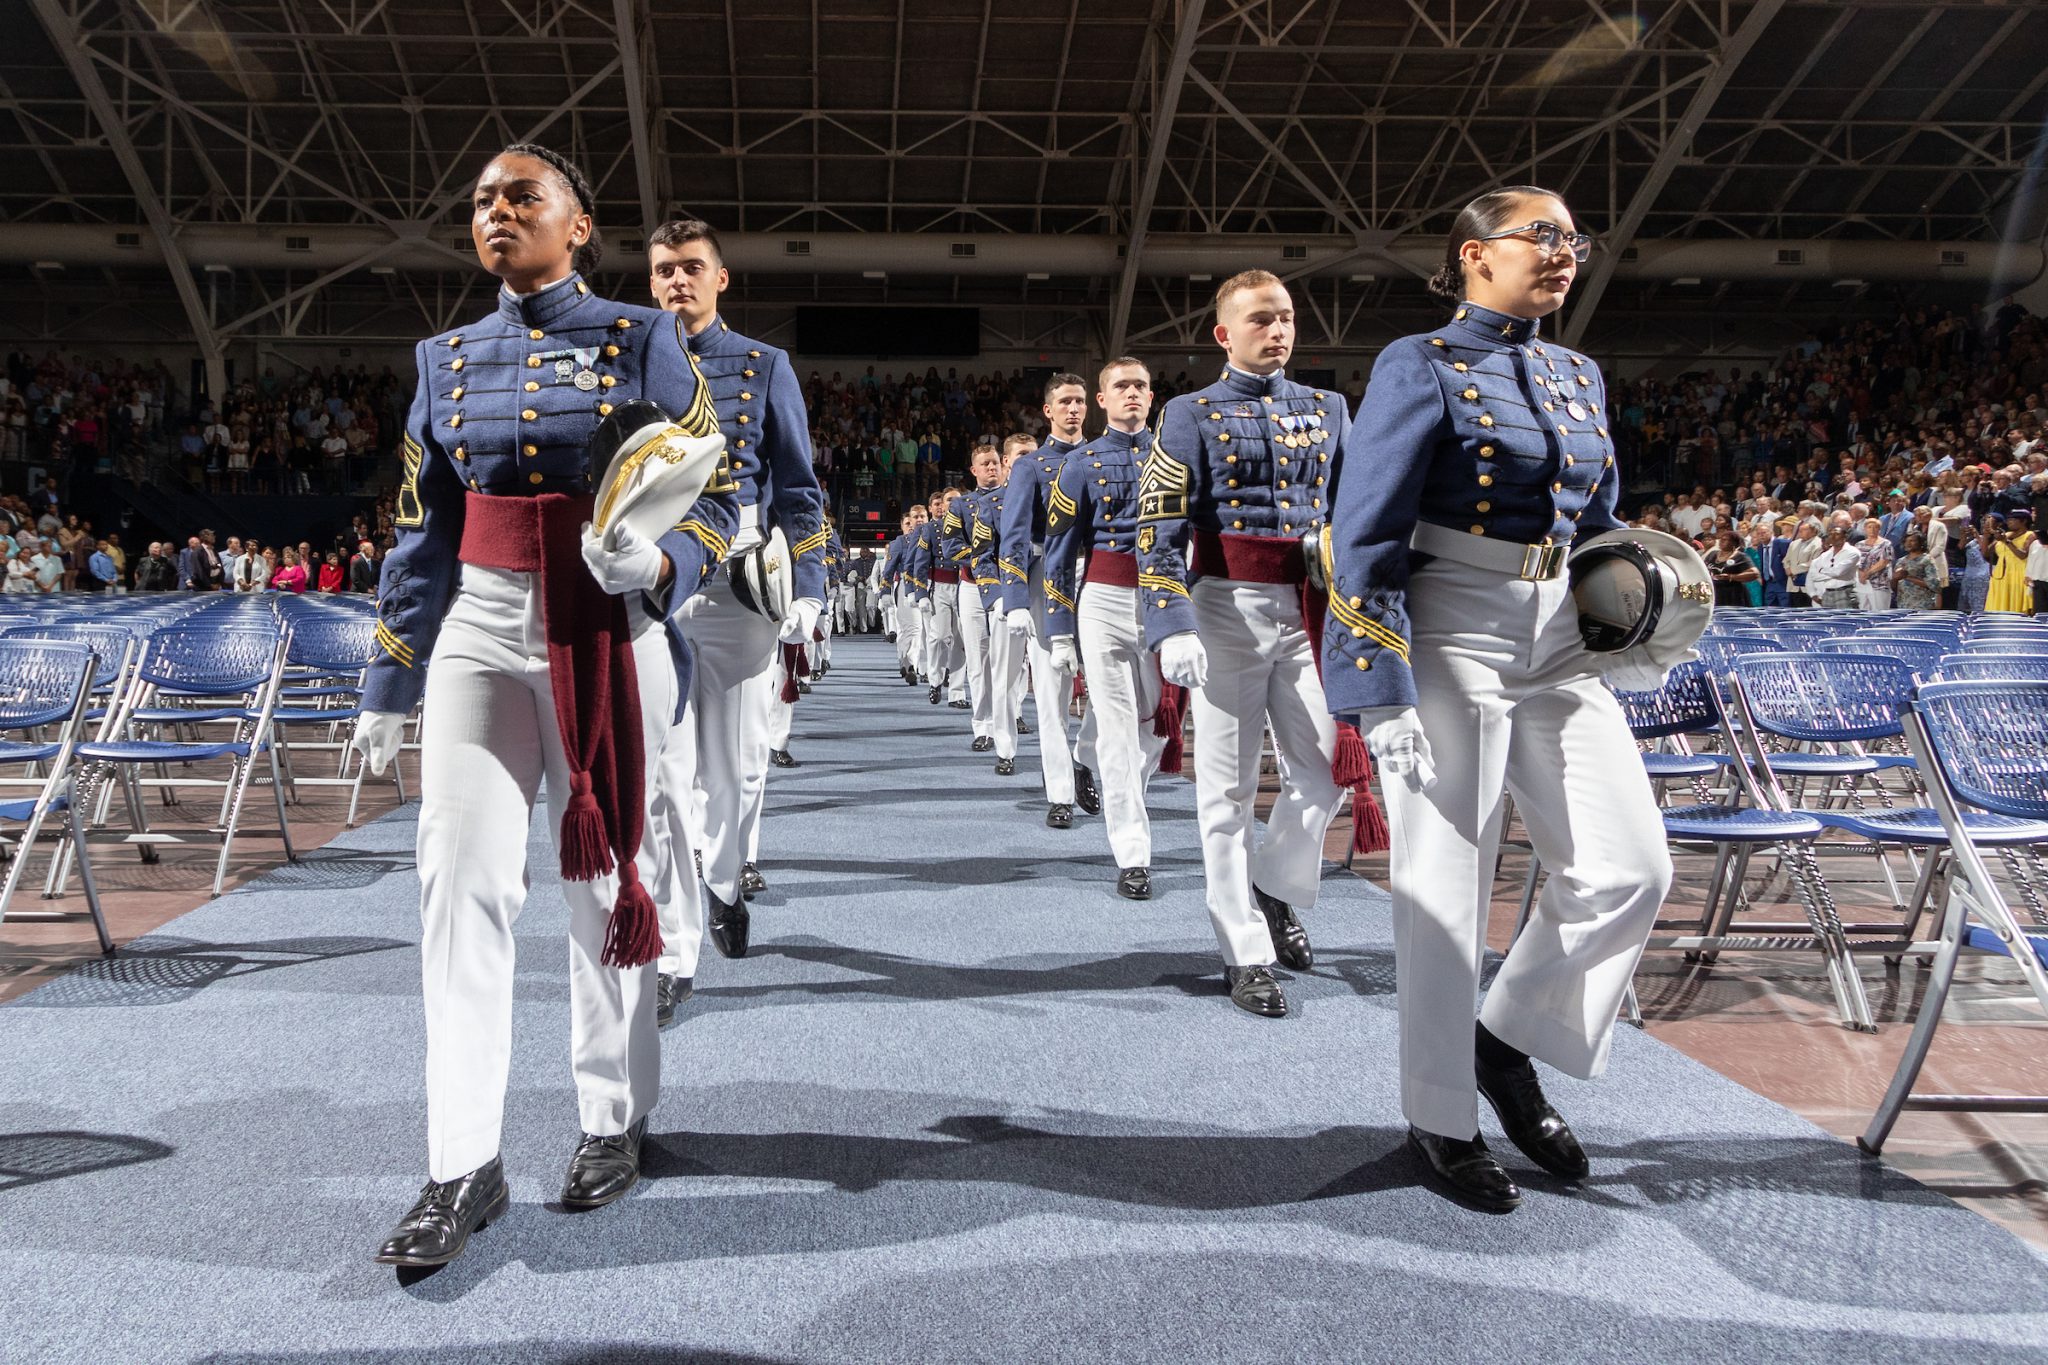 Citadel Class of 2021 Commencement information and speakers The